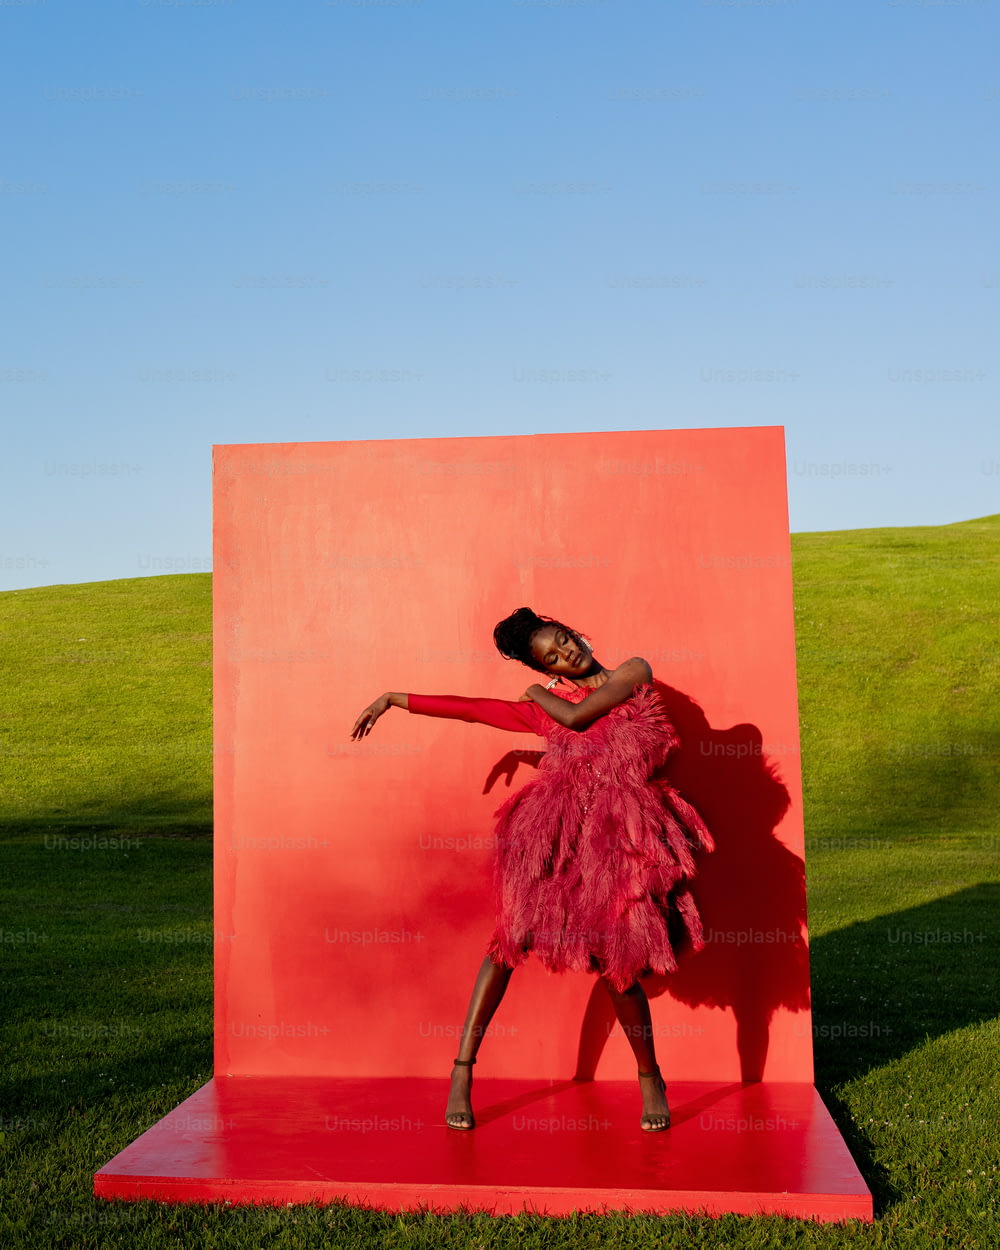 a woman in a pink dress is standing in front of a red sculpture